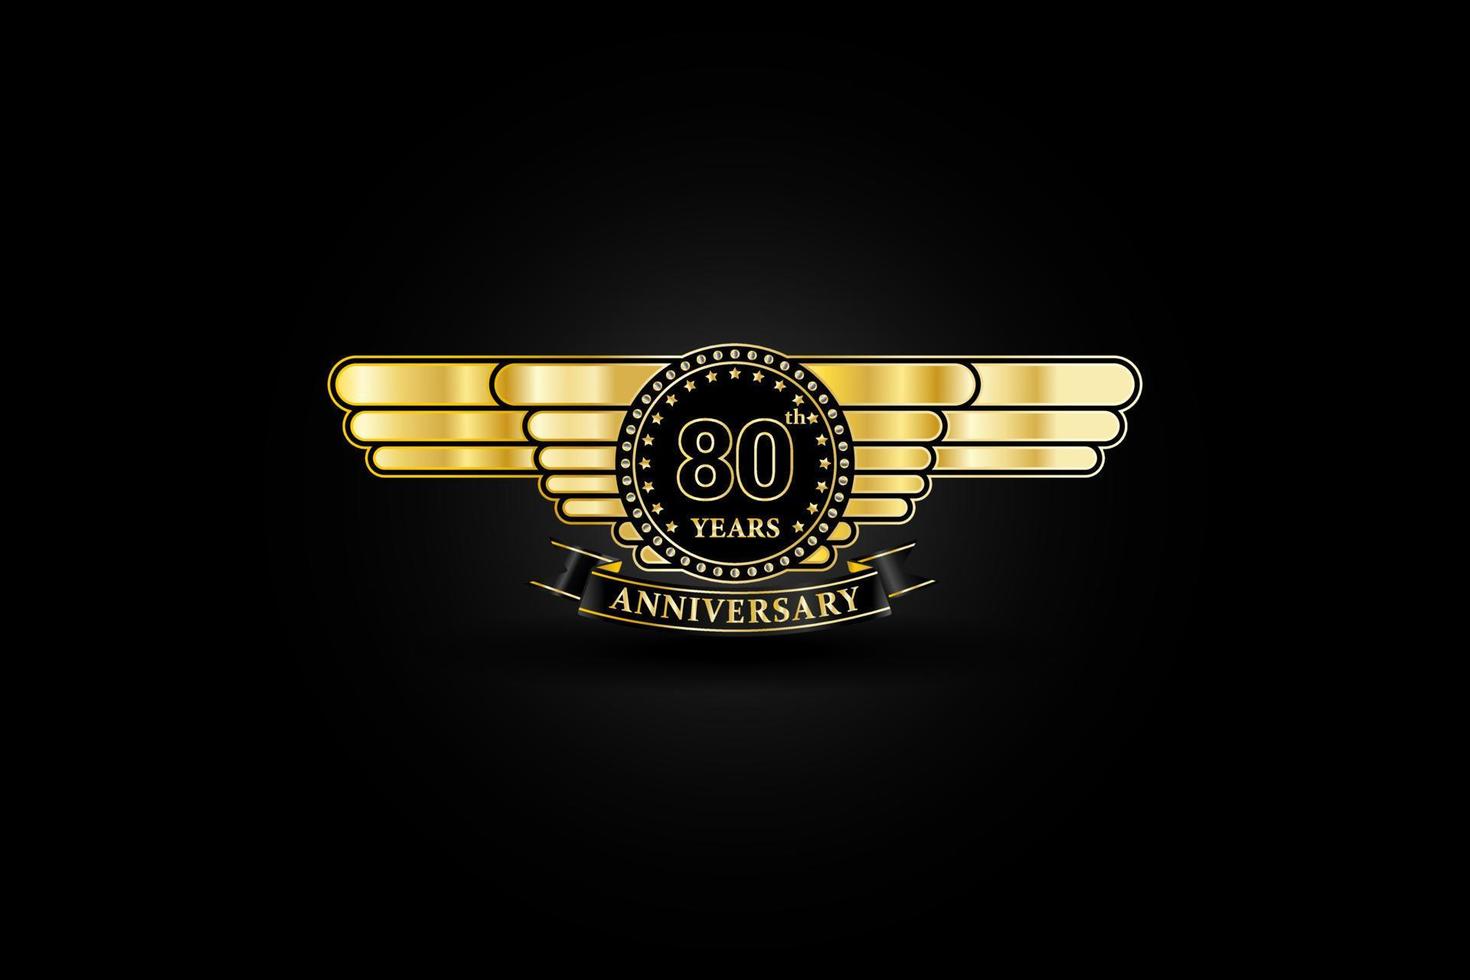 80th anniversary golden gold logo with gold wing and ribbon isolated on black background, vector design for celebration.